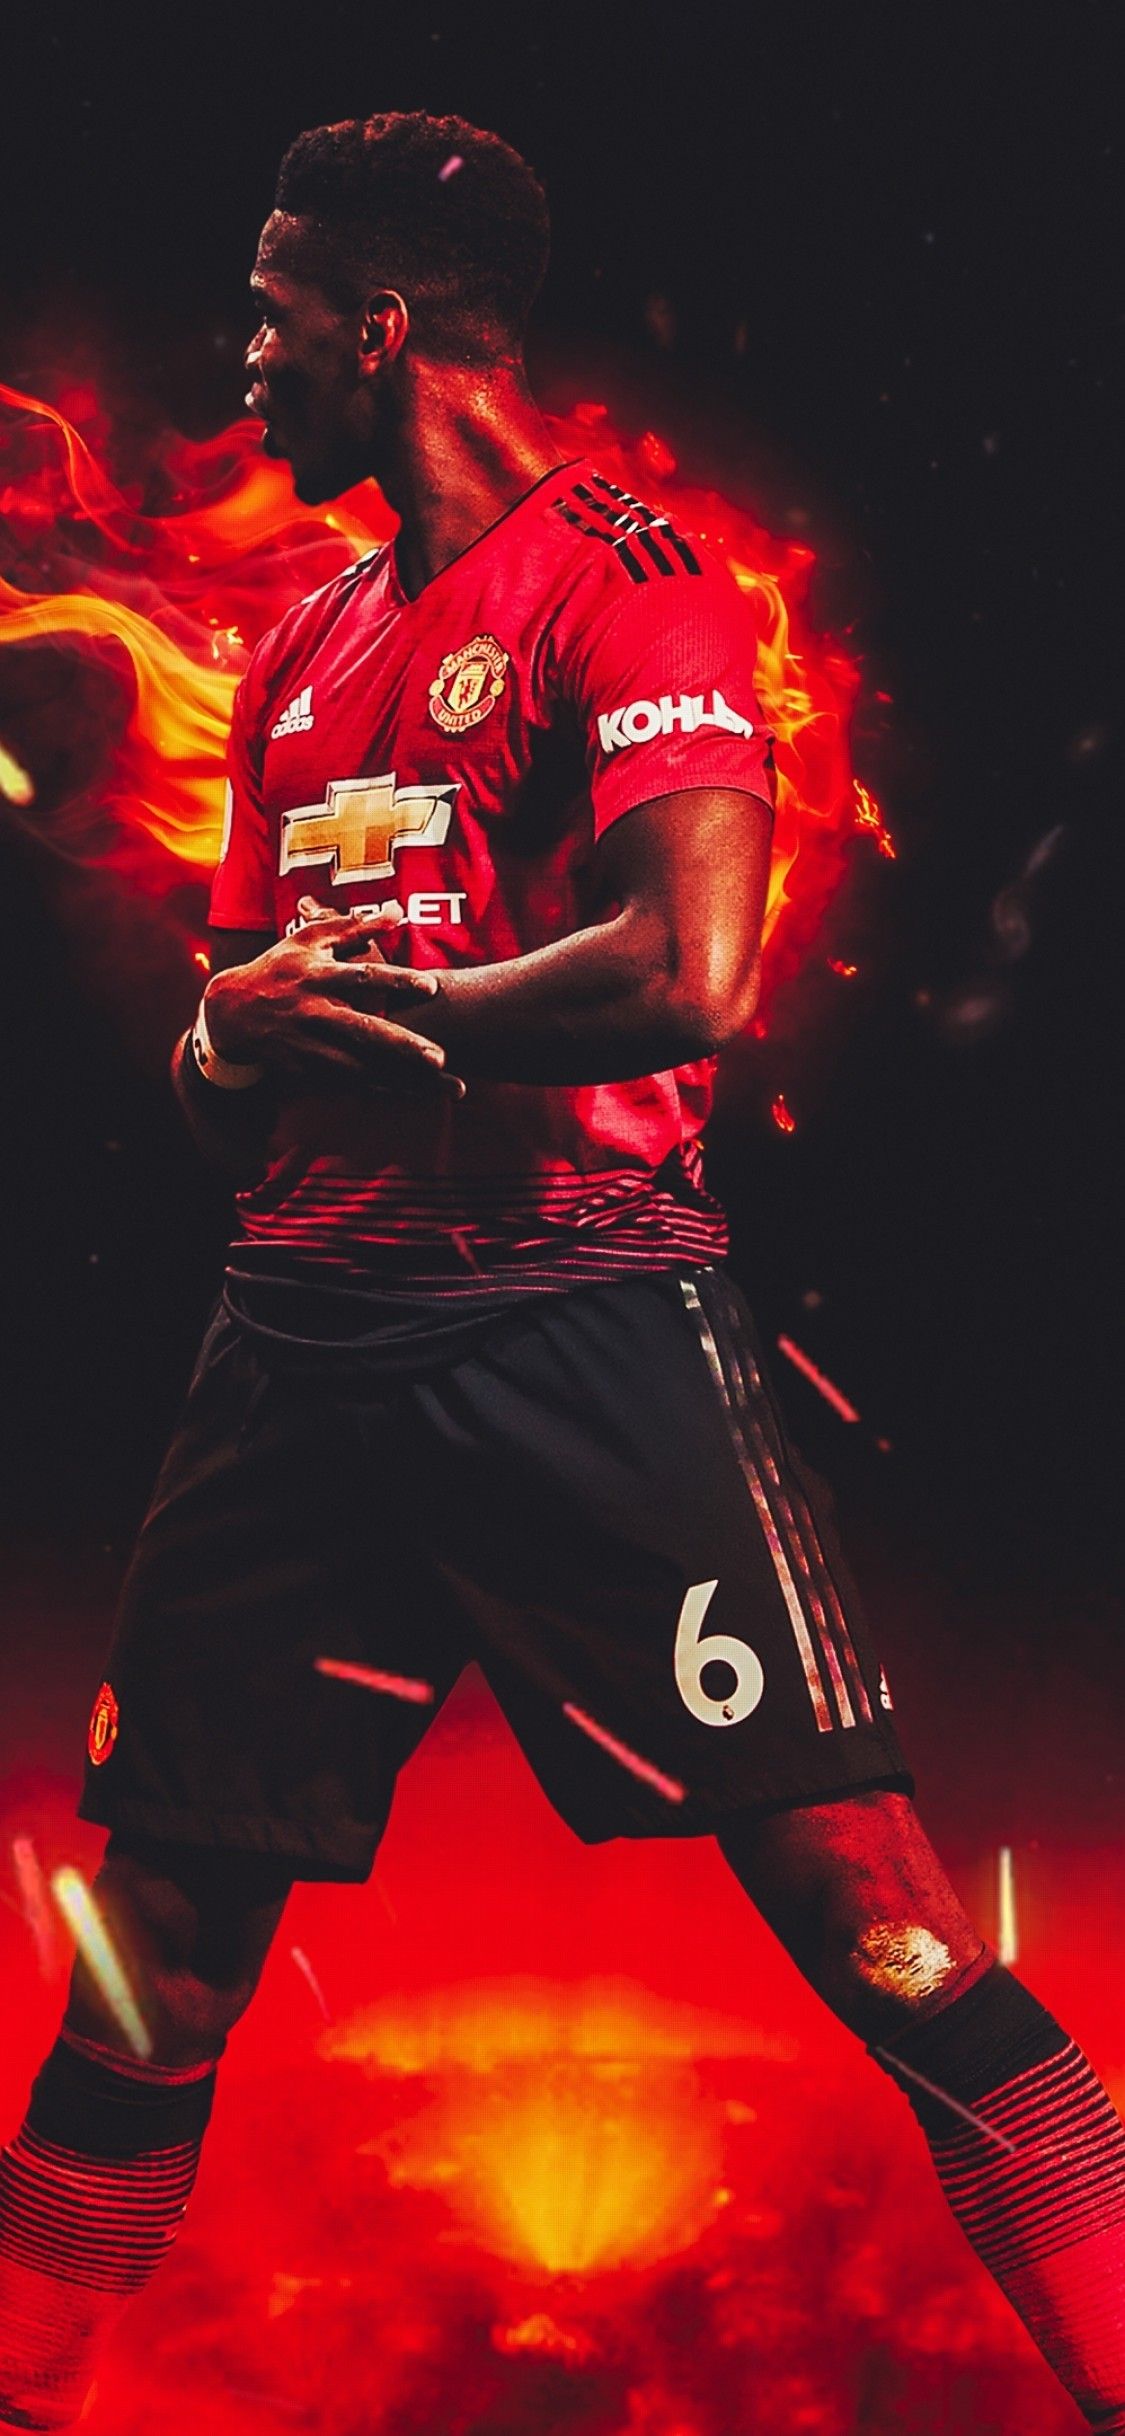 Download 1125x2436 Paul Pogba, Football Player, Manchester United Wallpaper for iPhone X